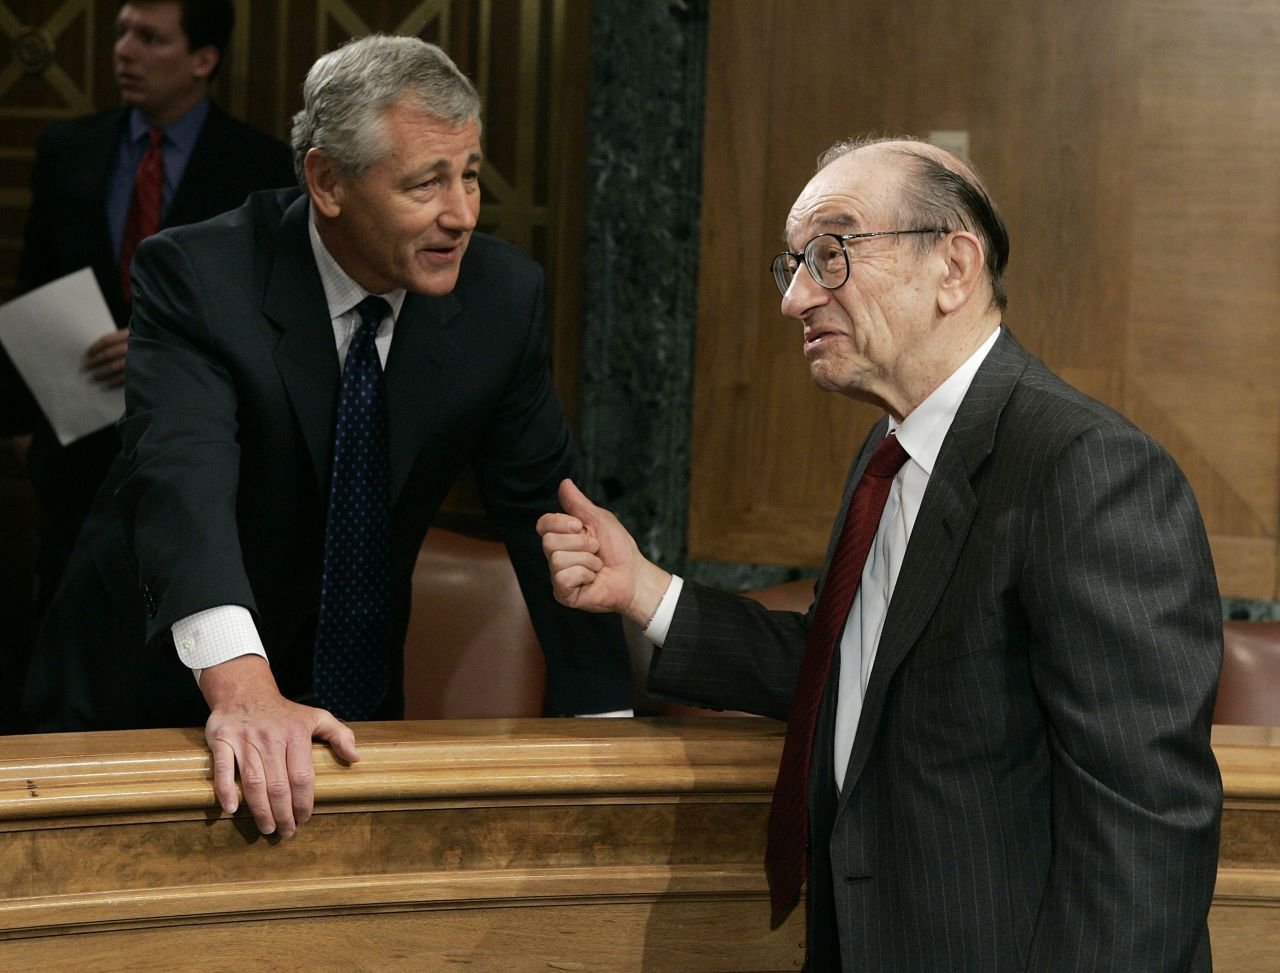 Hagel chats with Alan Greenspan, then-Federal Reserve chairman, before the start of a Senate Banking, Housing and Urban Affairs Committee hearing in April 2005.